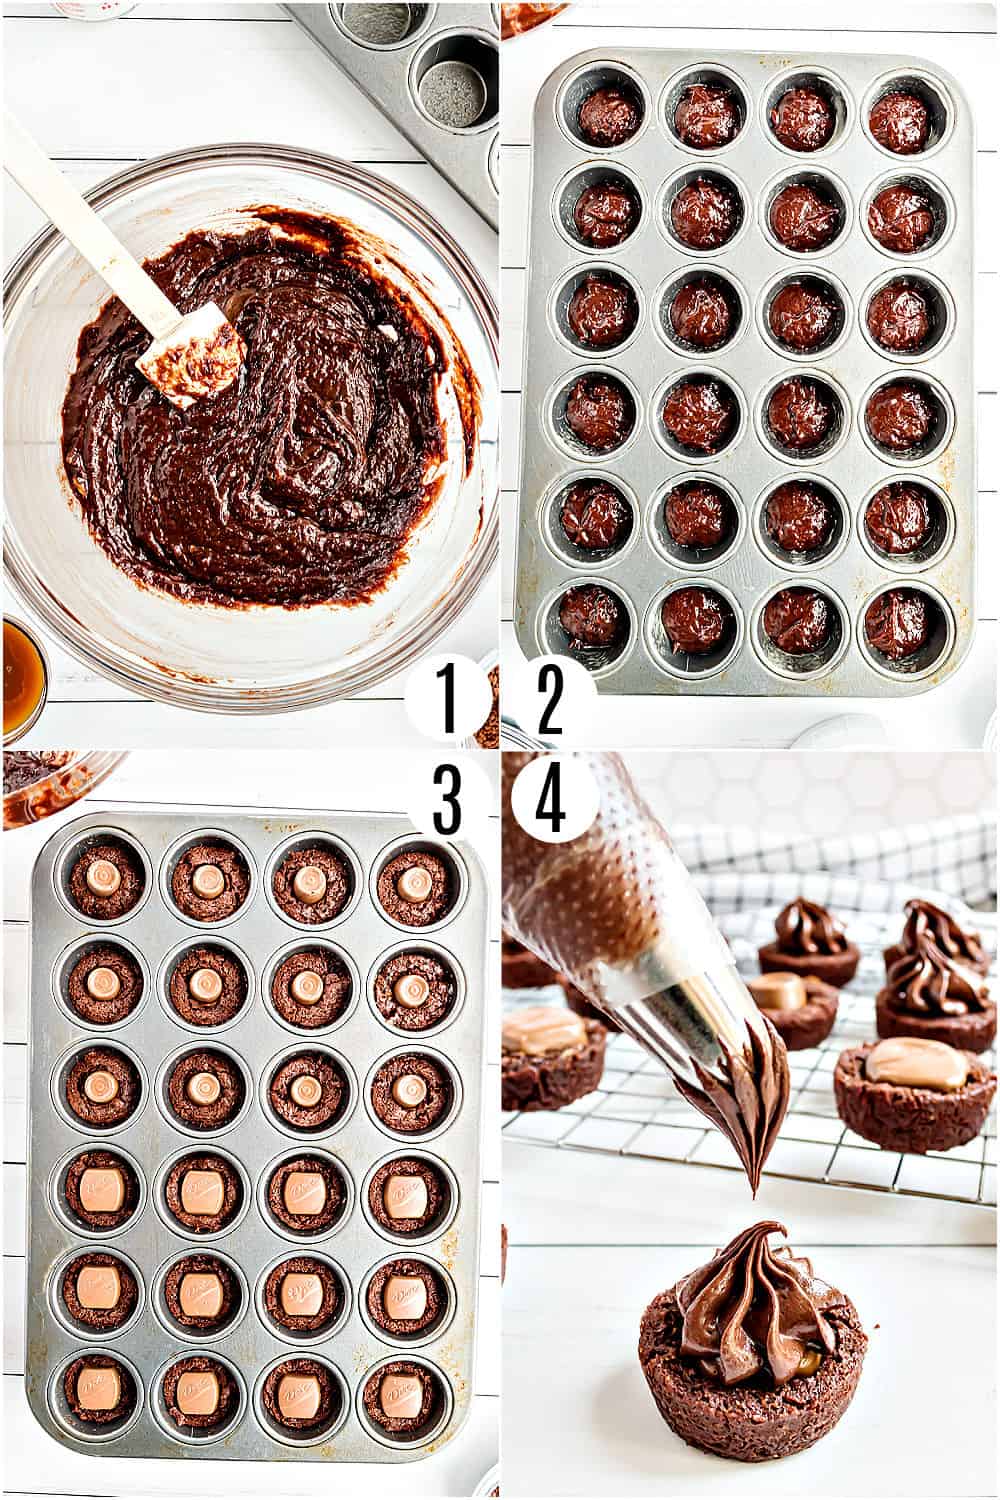 Step by step photos showing how to make chocolate caramel brownie bites.